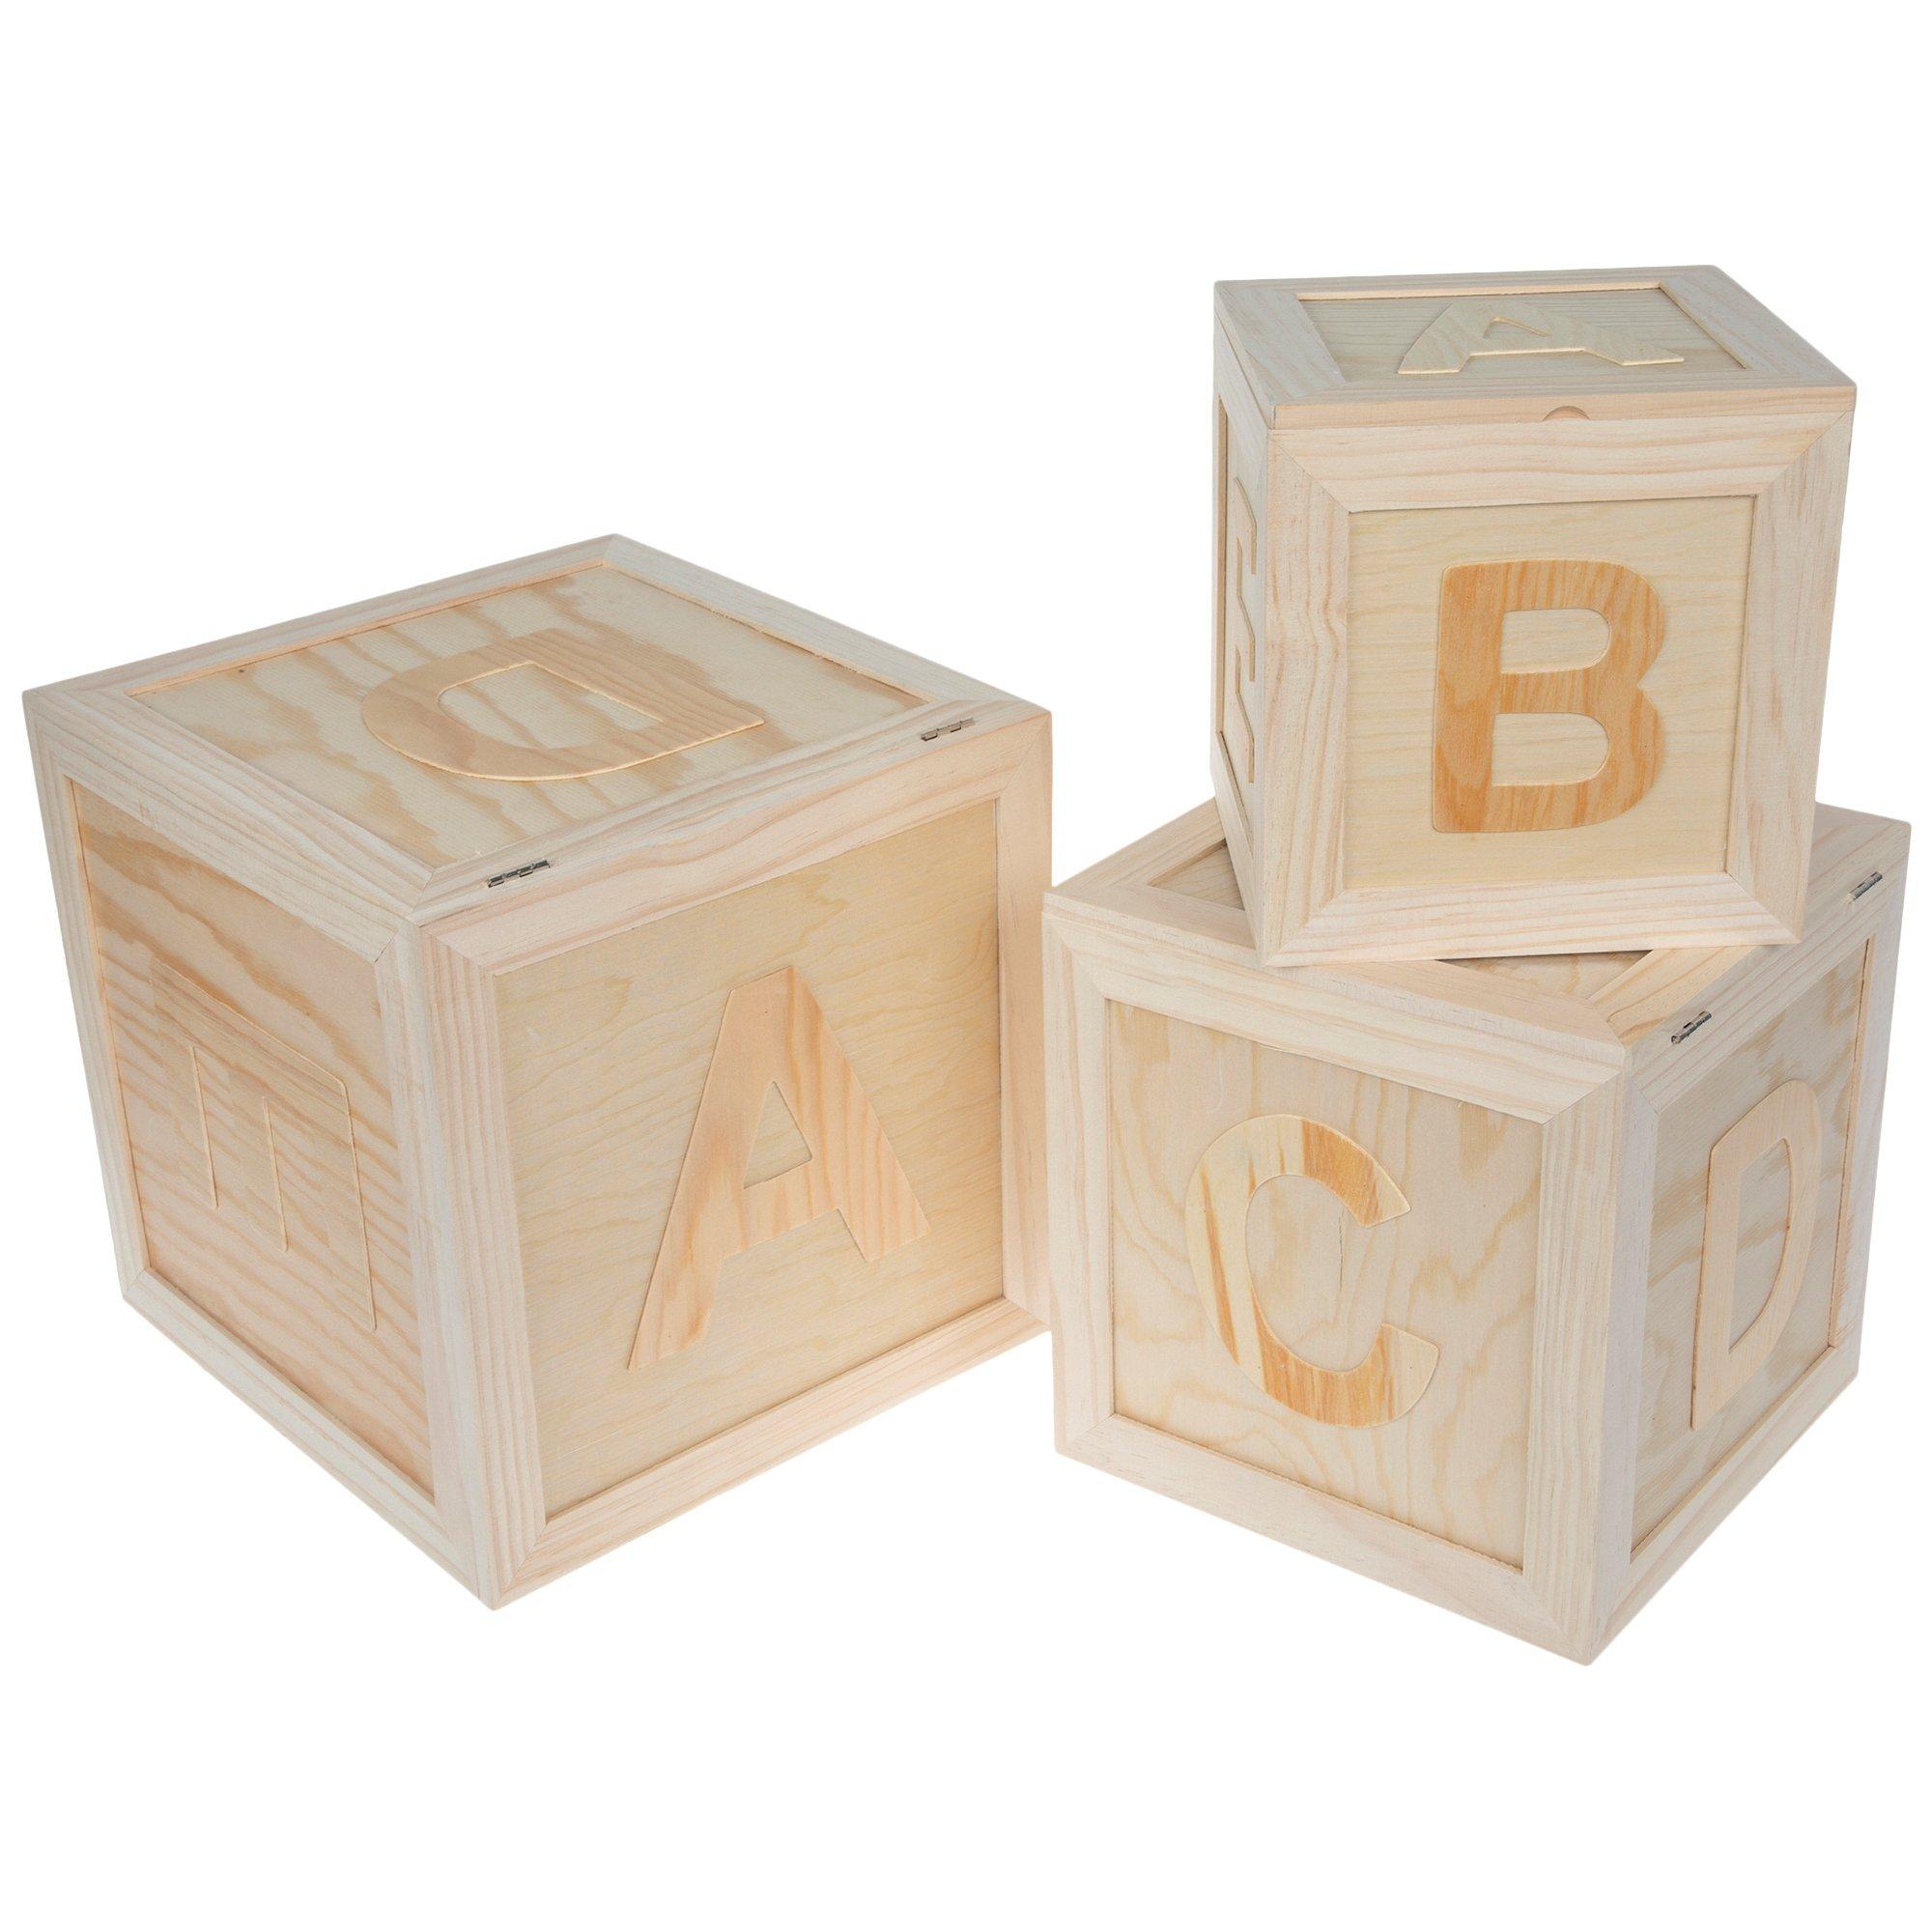 Party Prop/Decor - 6 Unfinished Solid Wood Blocks/Cubes For Baby Shower  Activity/Wedding/School Projects, 2.25